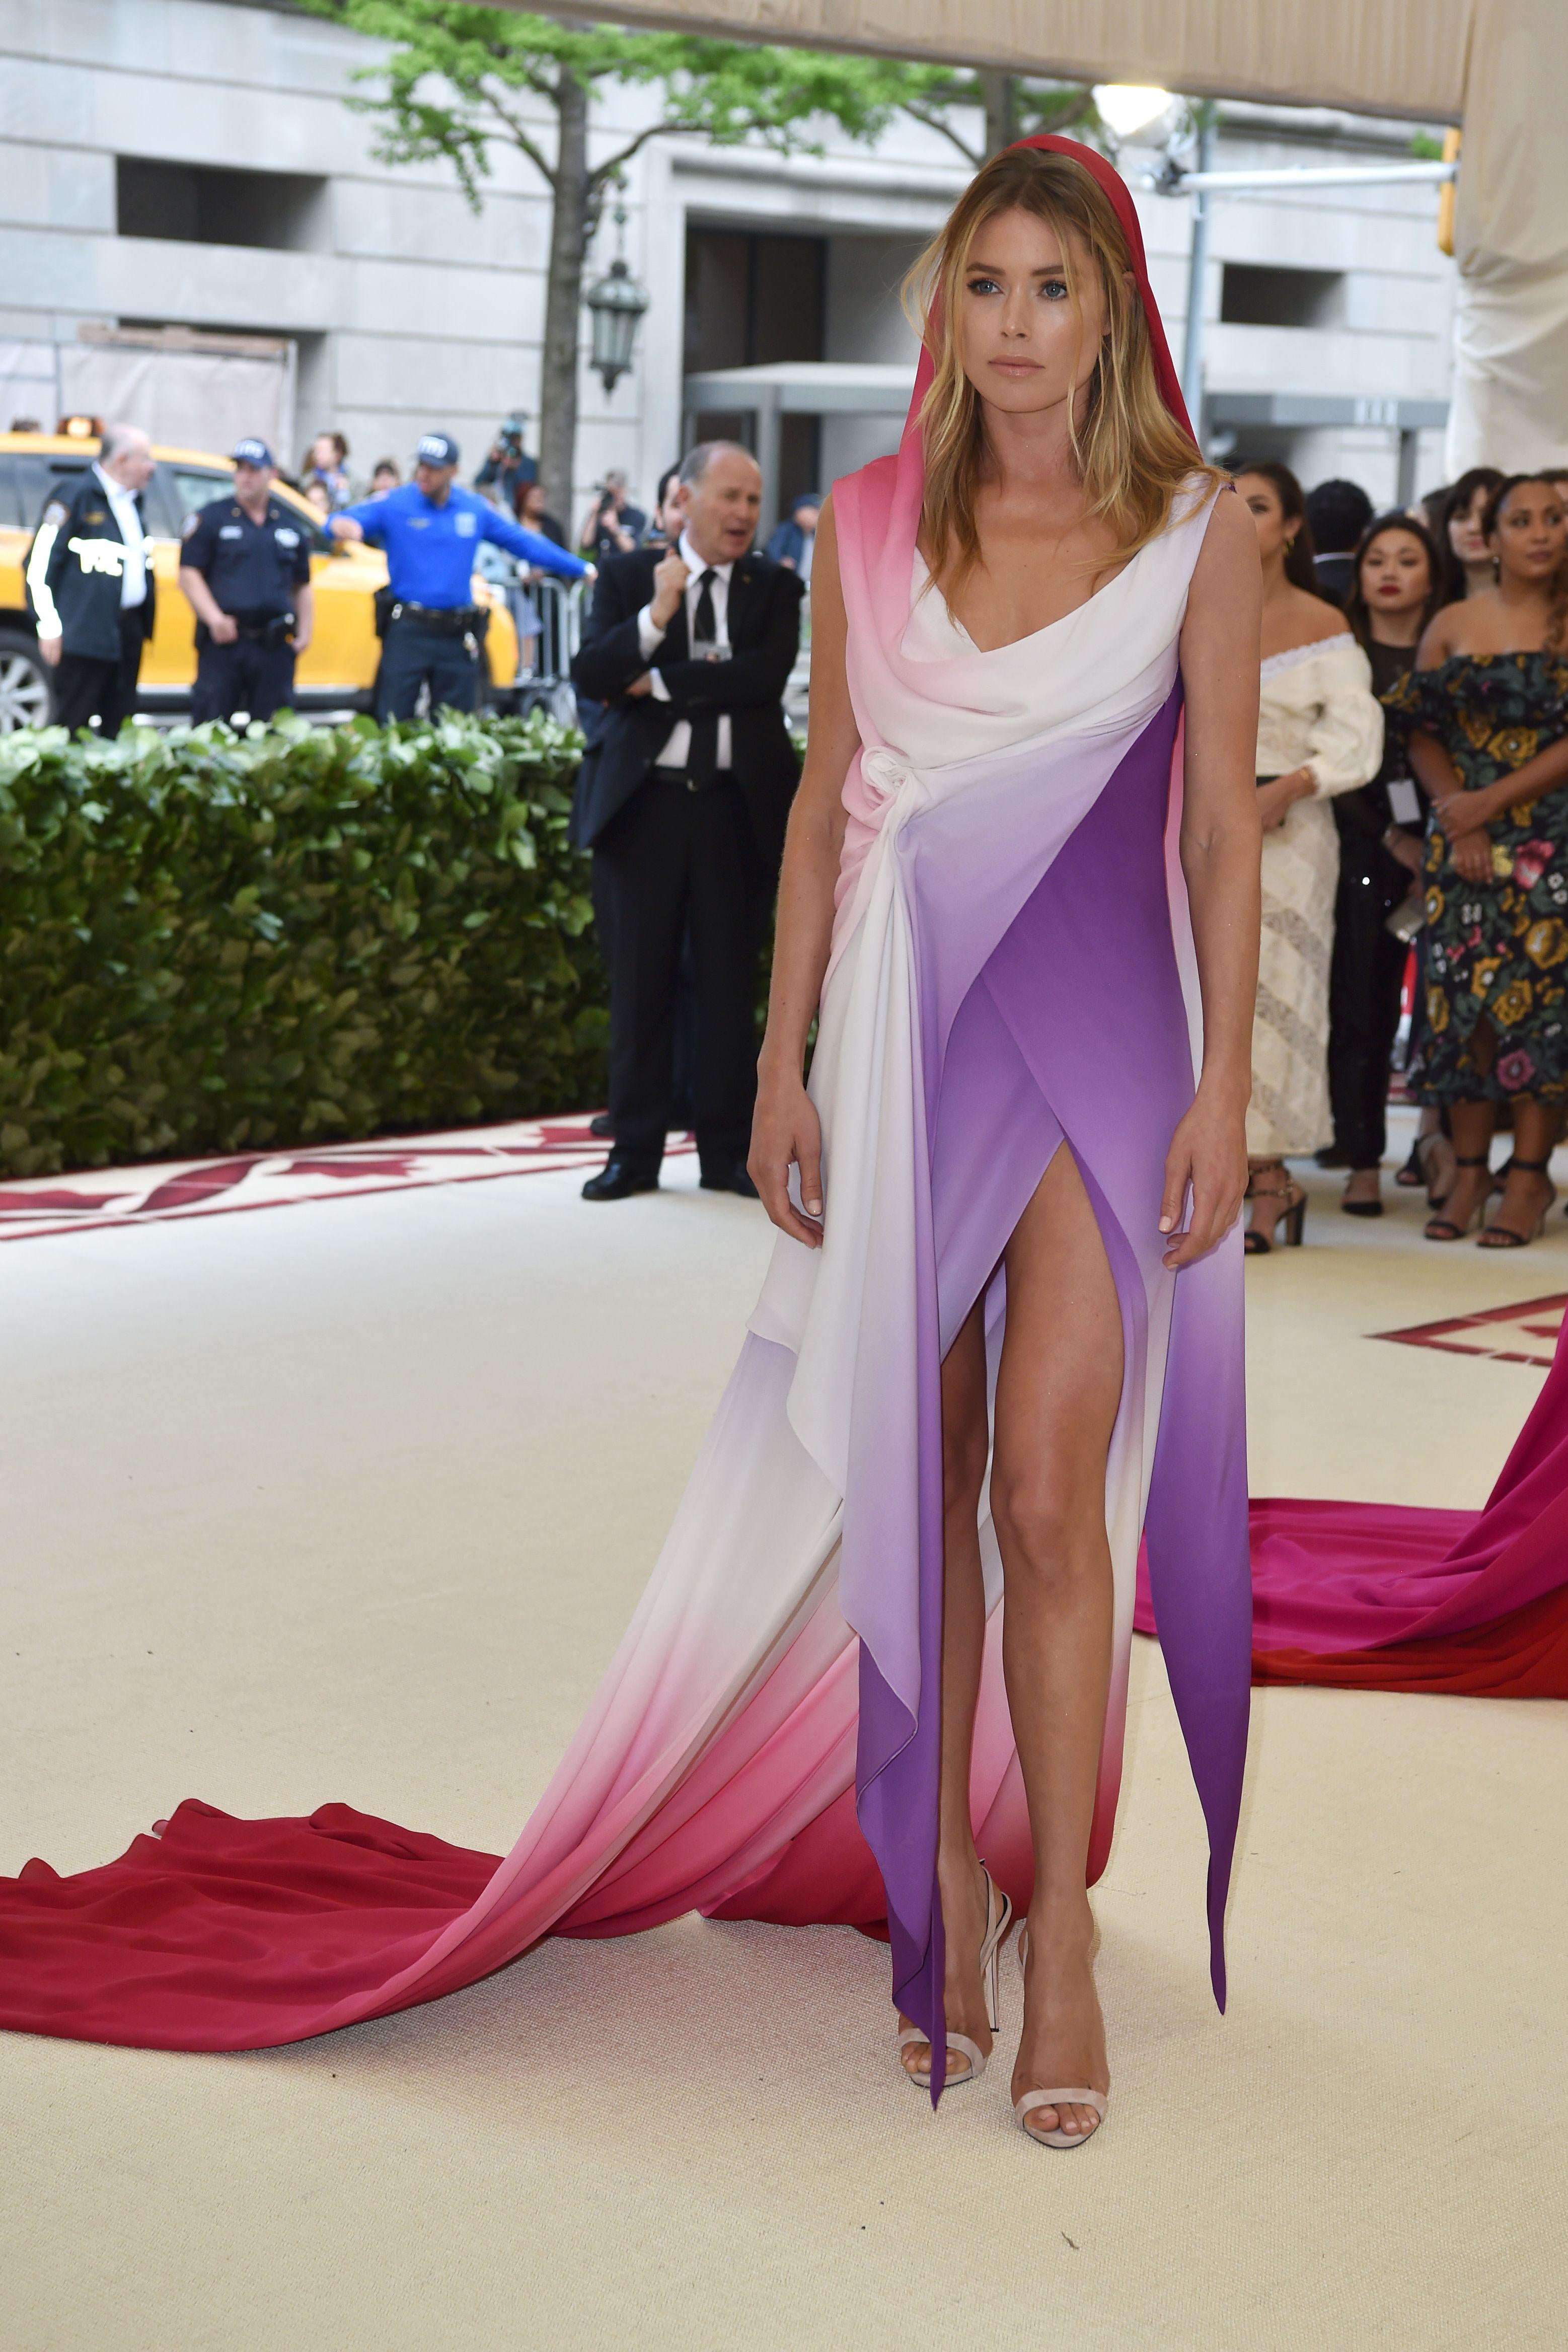 Doutzen Kroes arrives for the 2018 Met Gala on May 7, 2018, at the Metropolitan Museum of Art in New York. - The Gala raises money for the Metropolitan Museum of Arts Costume Institute. The Gala's 2018 theme is Heavenly Bodies: Fashion and the Catholic Imagination. (Photo by Hector RETAMAL / AFP)        (Photo credit should read HECTOR RETAMAL/AFP/Getty Images)